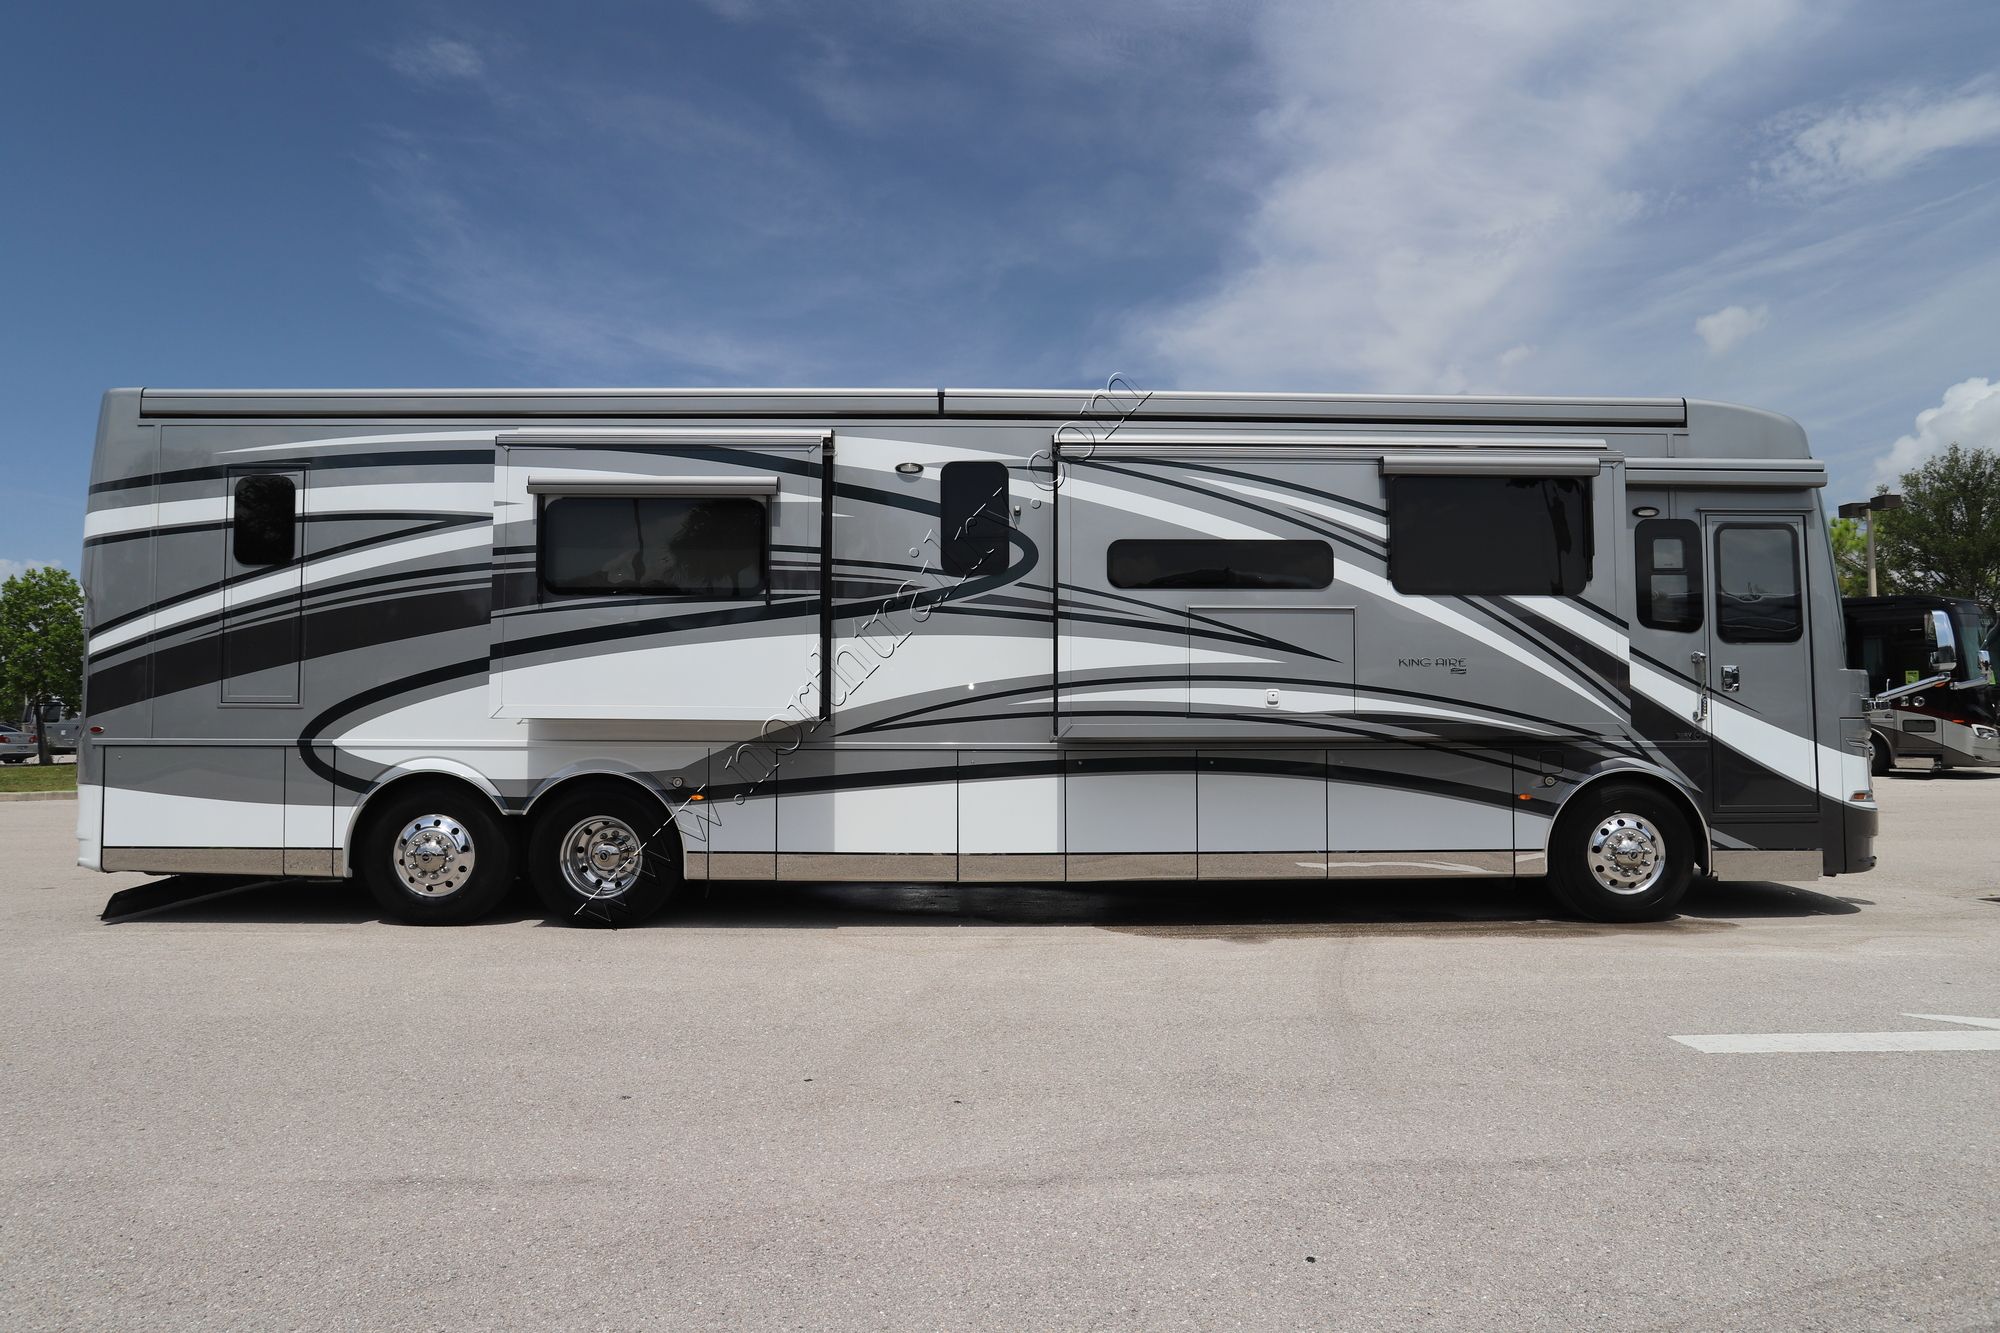 Used 2019 Newmar King Aire 4531 Class A  For Sale